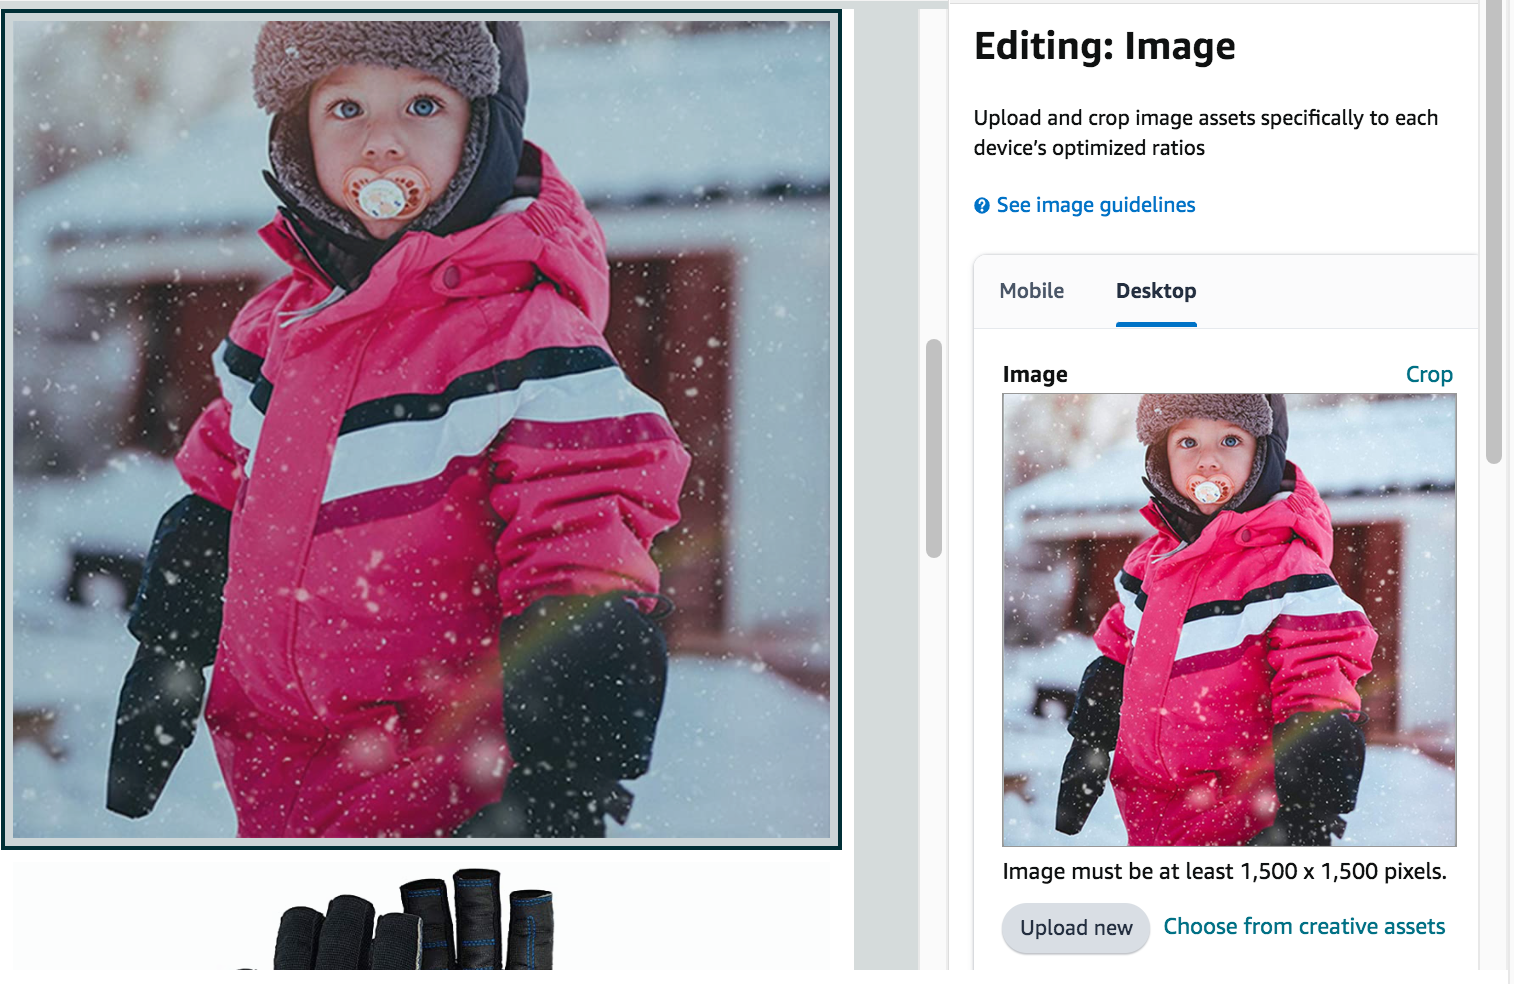 Use high-quality images to populate your Amazon store